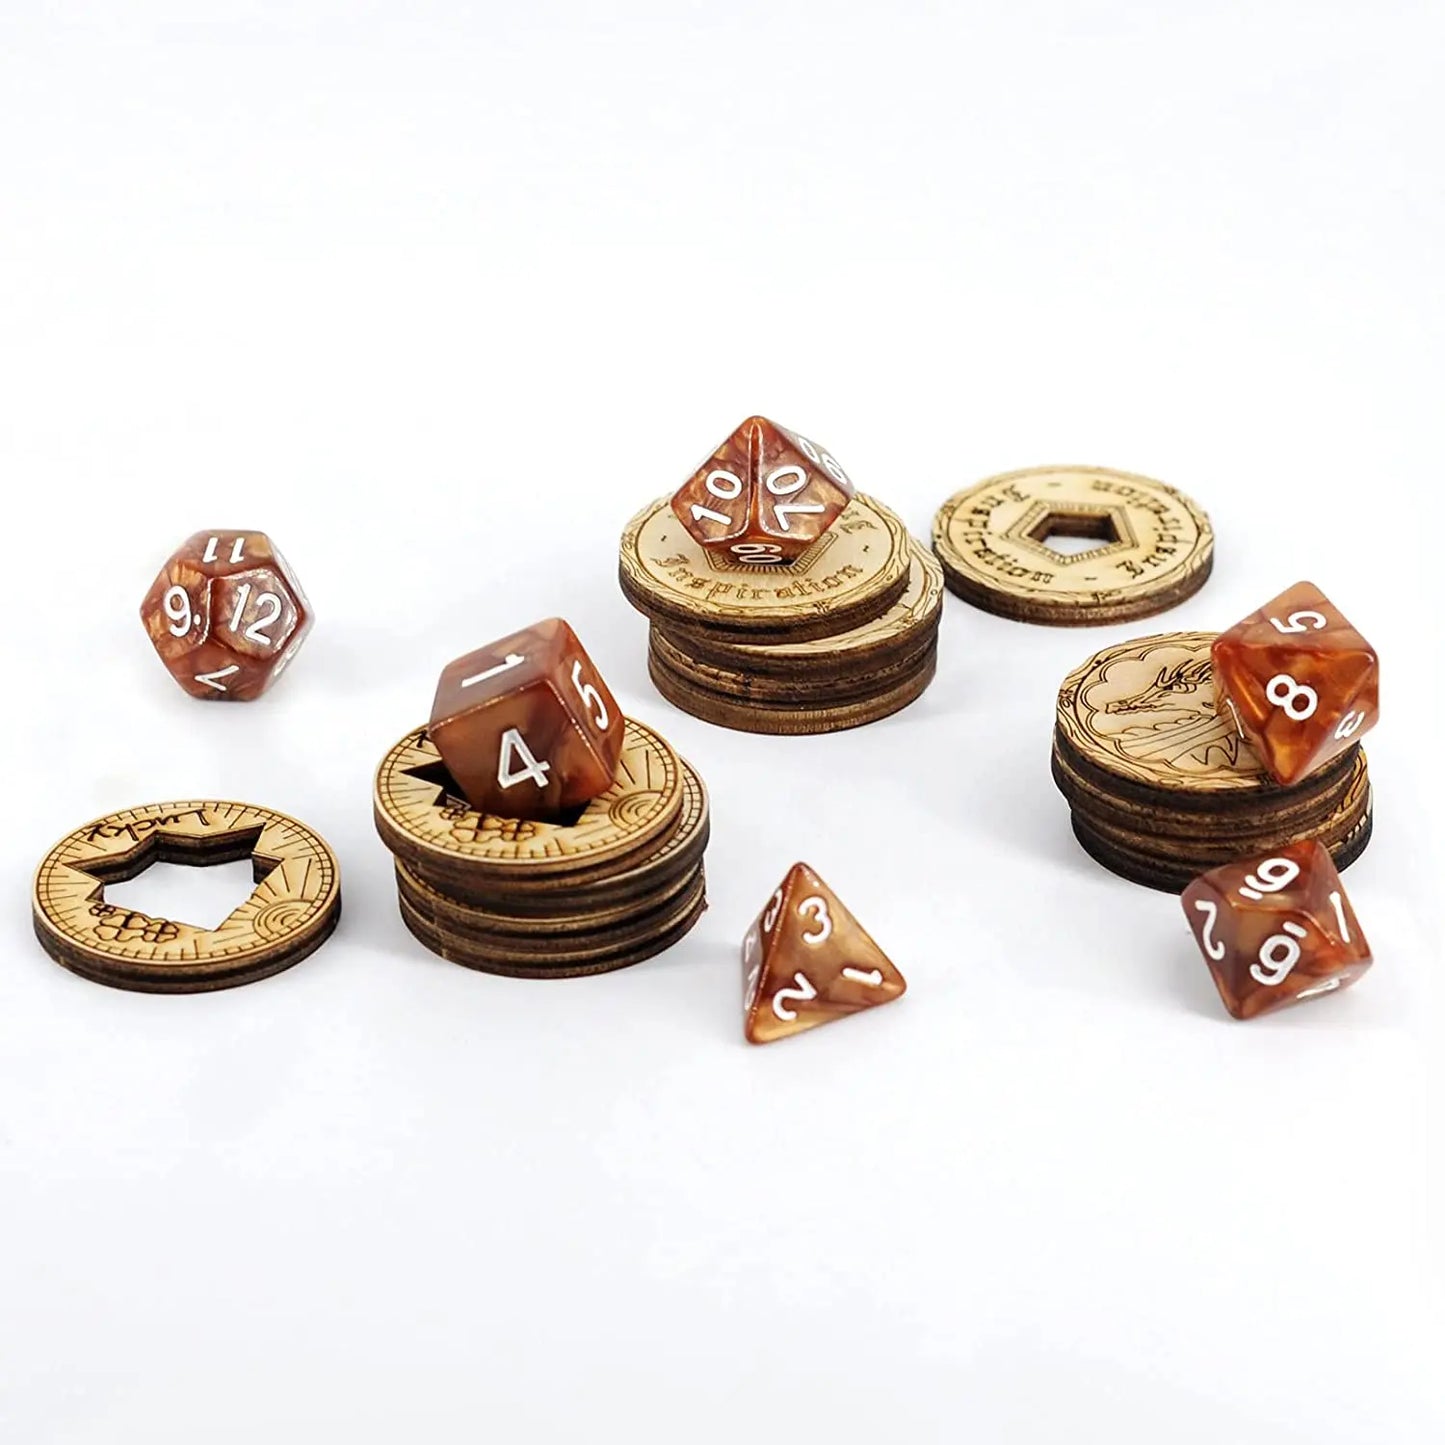 D&D Inspiration Coin Tokens Laser Cut Wood Carved with Dragon & Ship Rudder (Set of 9) Board Games for Adults